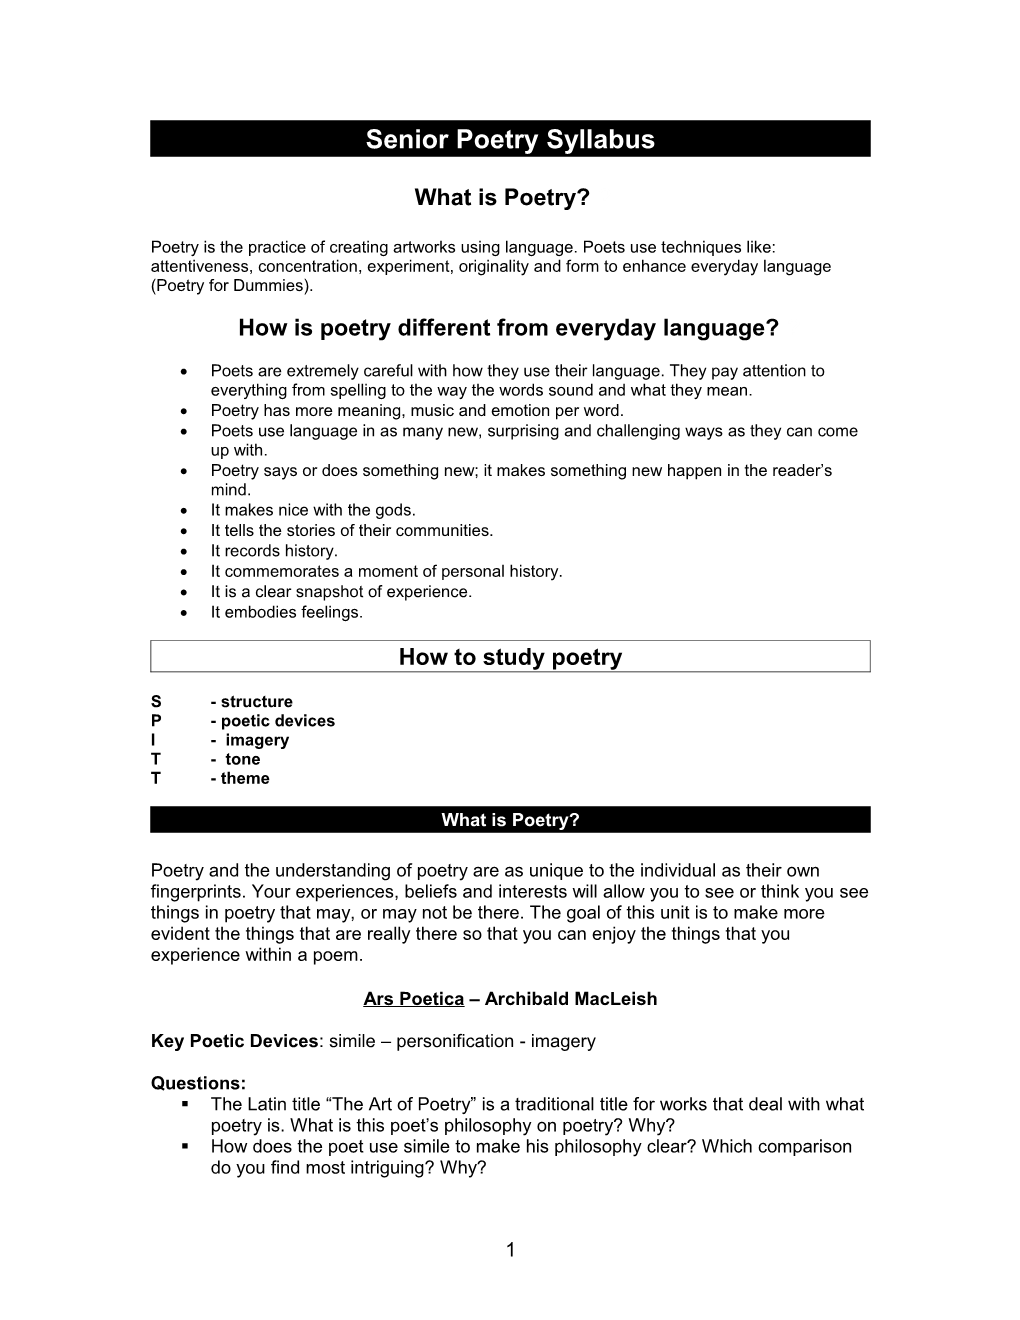 Poetry Study Guide s1